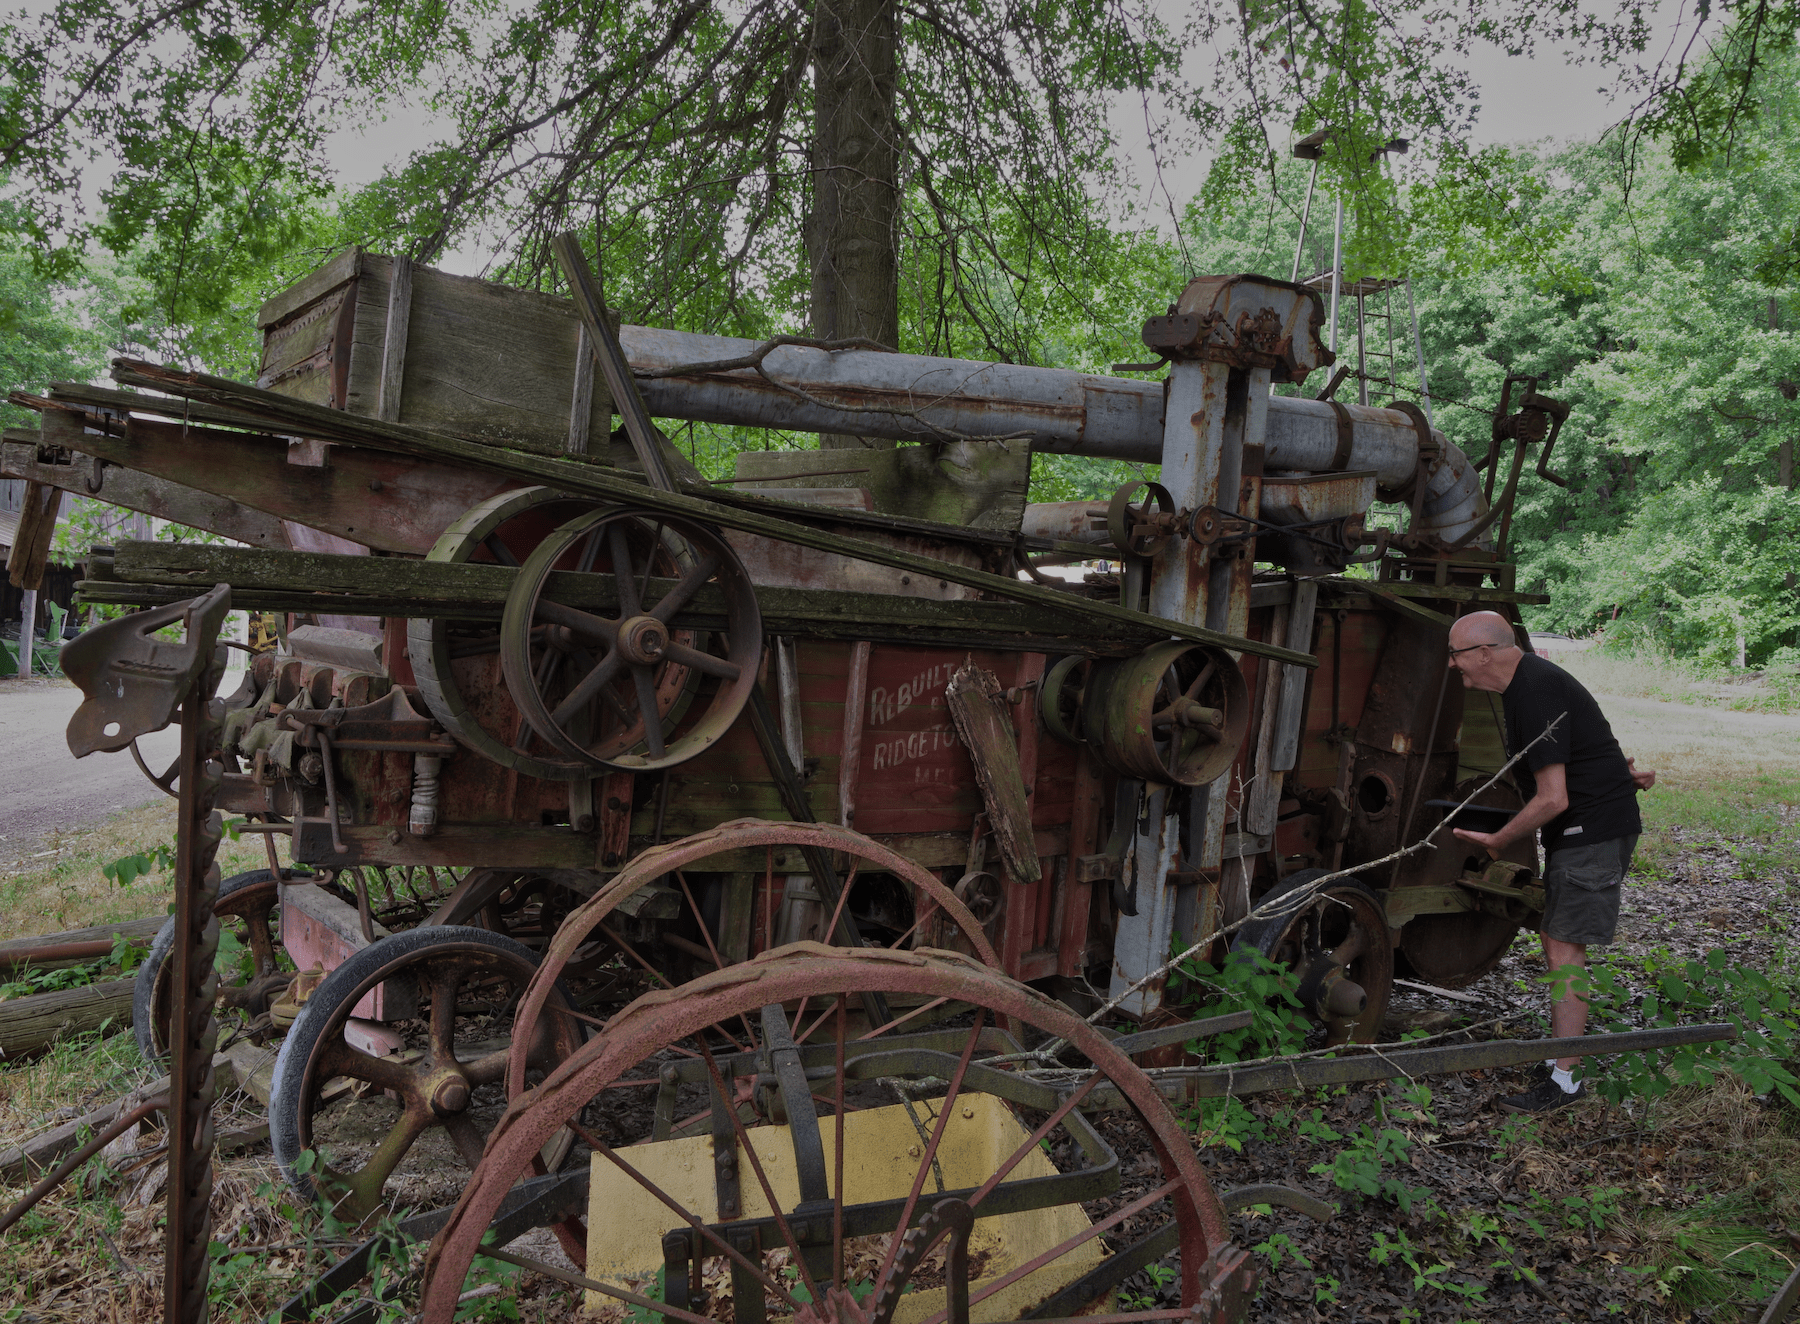 a picture of a bald man with a hat laughing at an old piece of farm equipment